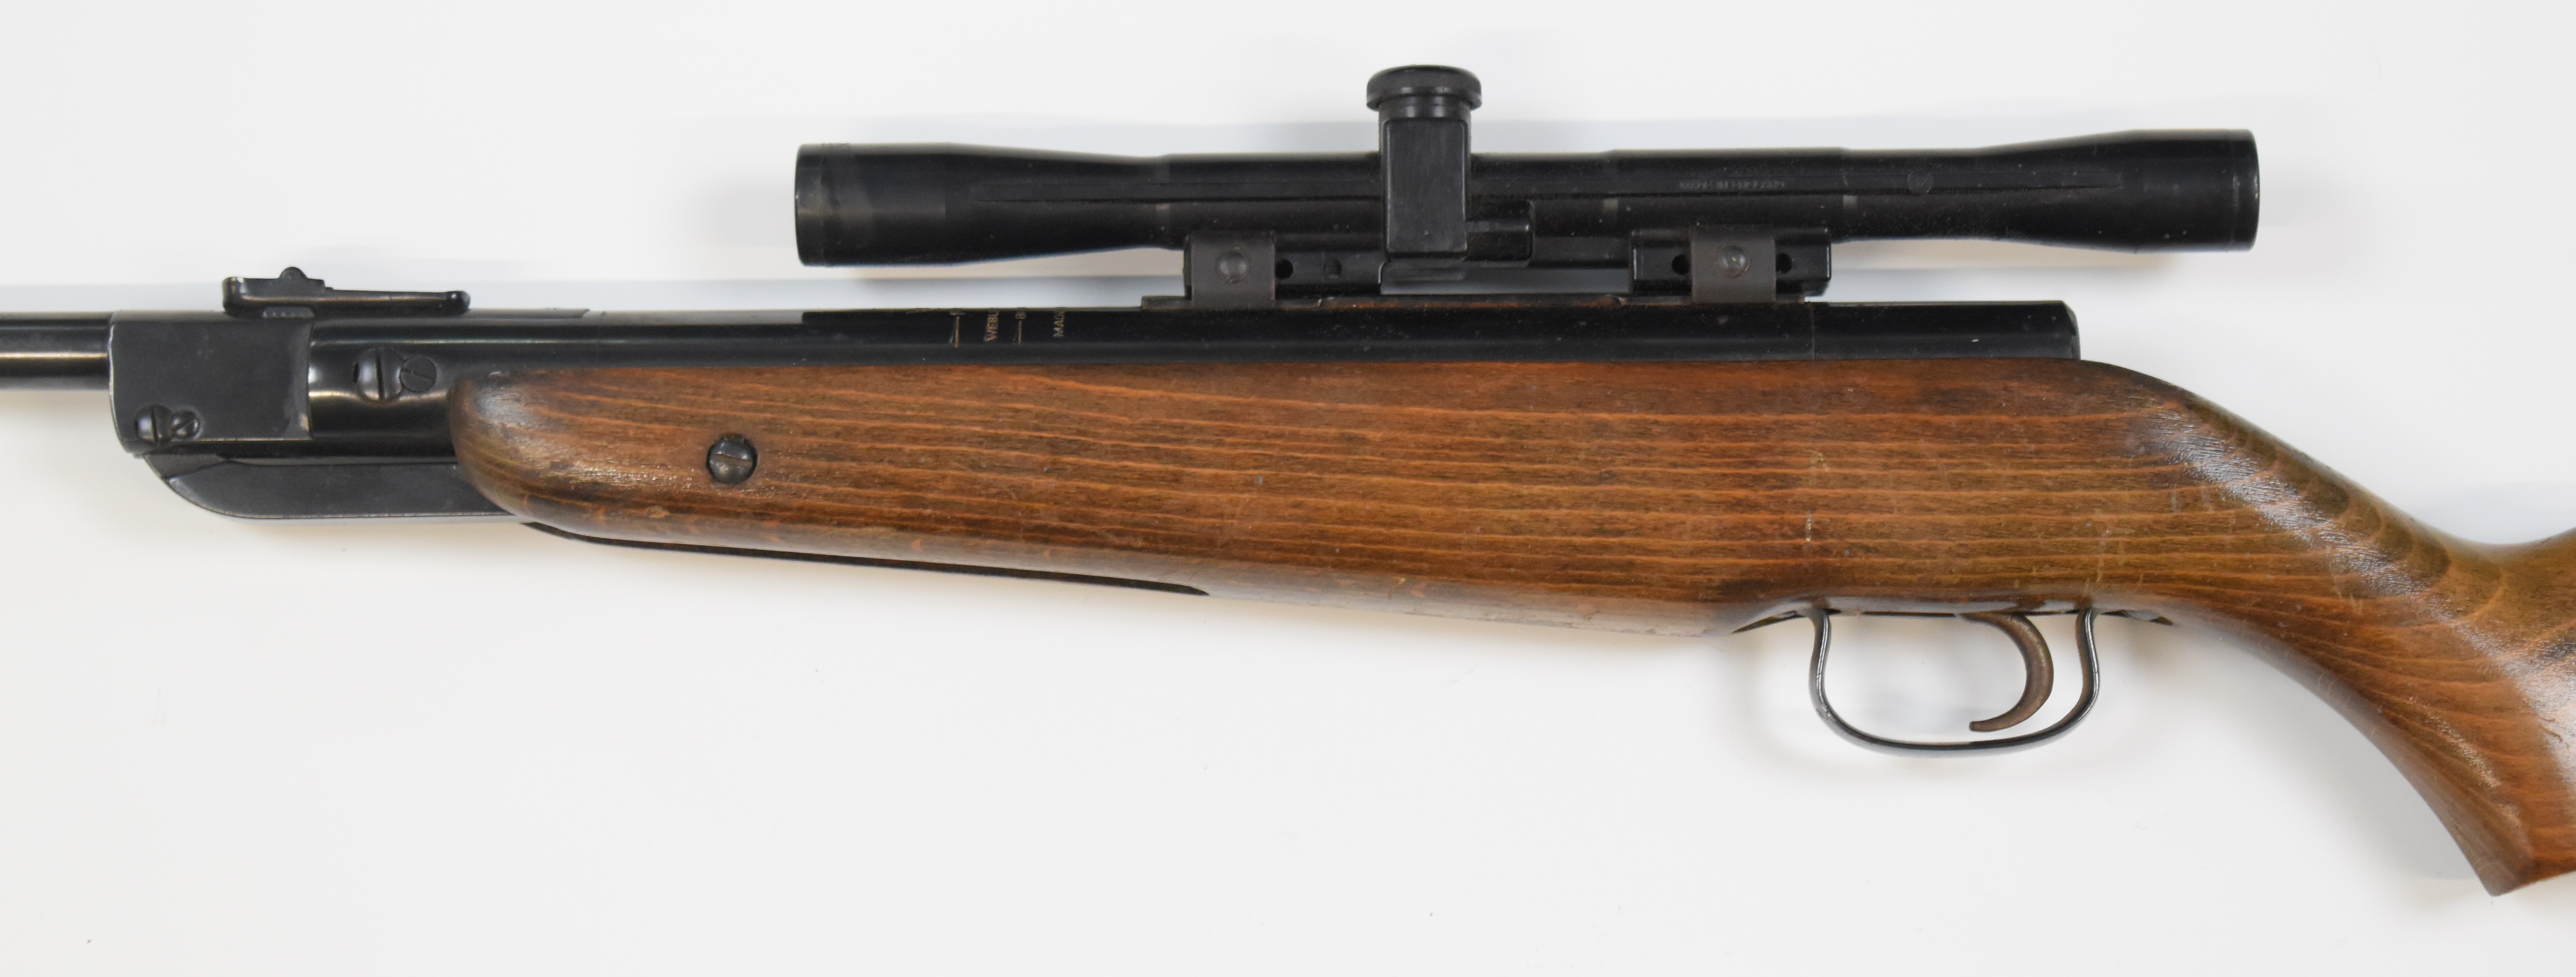 Webley Falcon .22 air rifle with semi-pistol grip, Webley plaque inset to the stock and scope, NVSN. - Image 8 of 9